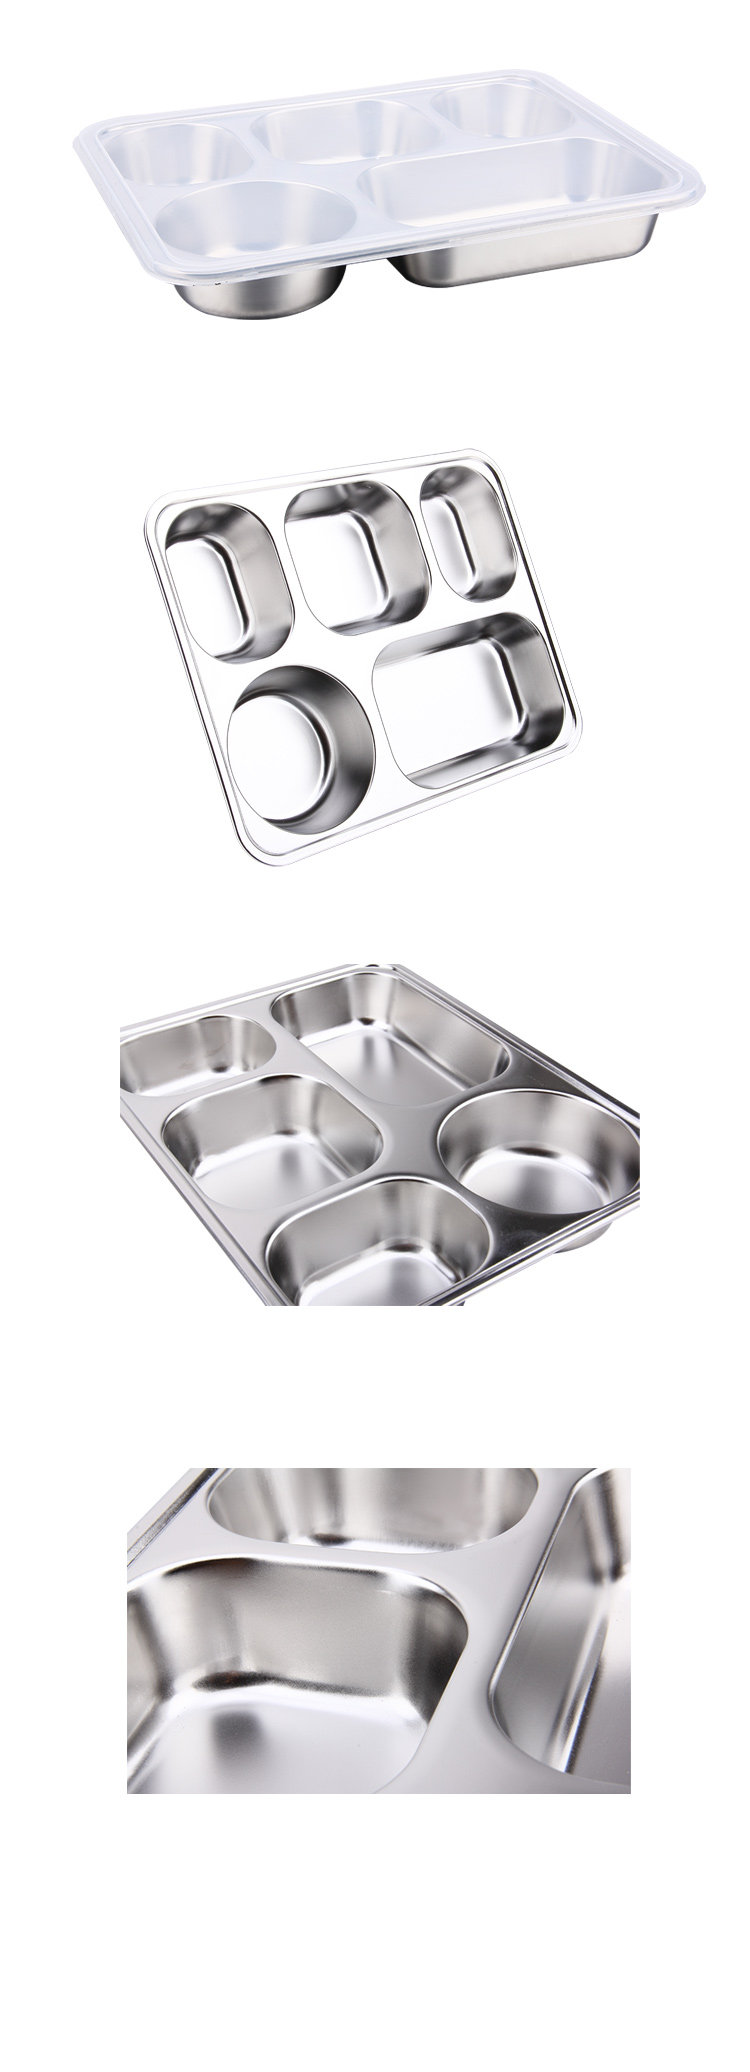 5 Divides Fast Food Plate & Stainless Steel Lunchbox